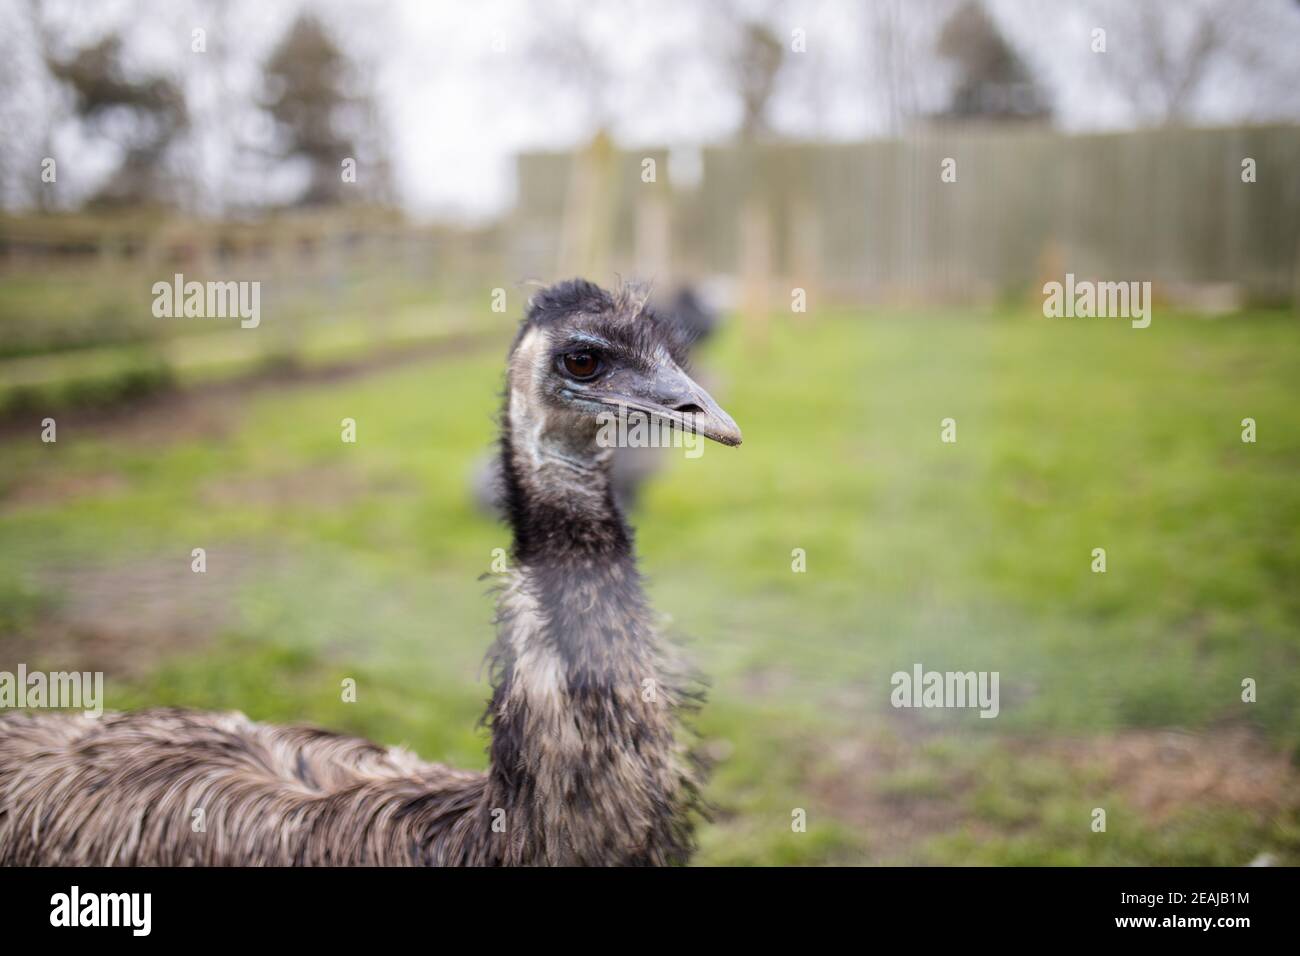 Up close view of an Emu behind a wire fence at a farmyard Stock Photo